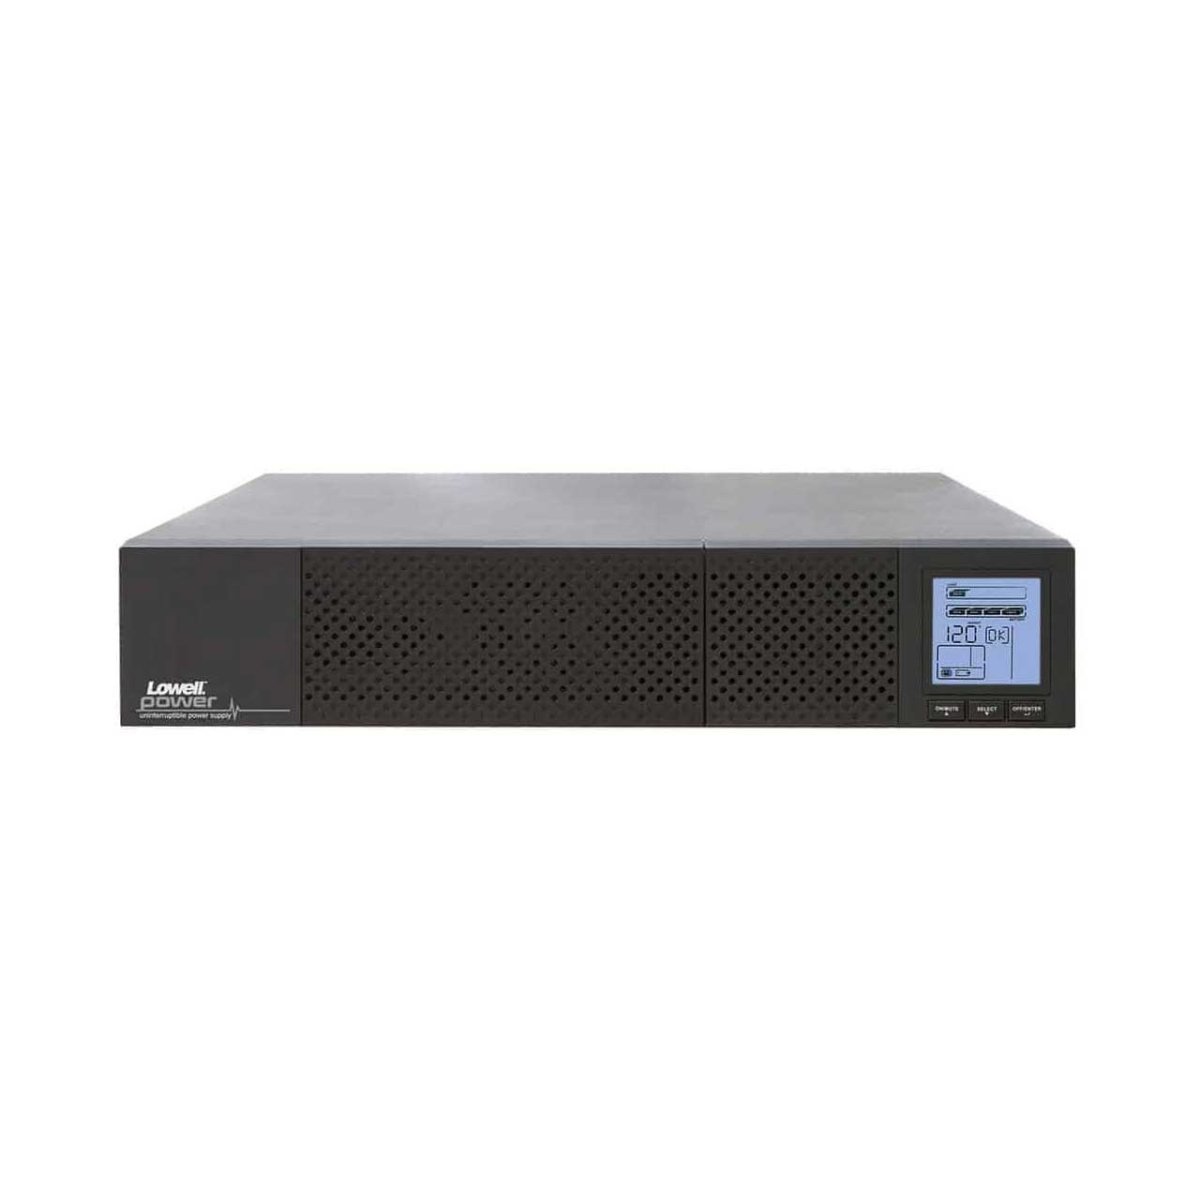 Picture of Lowell Manufacturing LMC-UPS8-1100-IP 1100VA 990 watt UPS8-1100-IP Line-Interactive UPS - Lead-Acid with SNMP Remote Monitoring